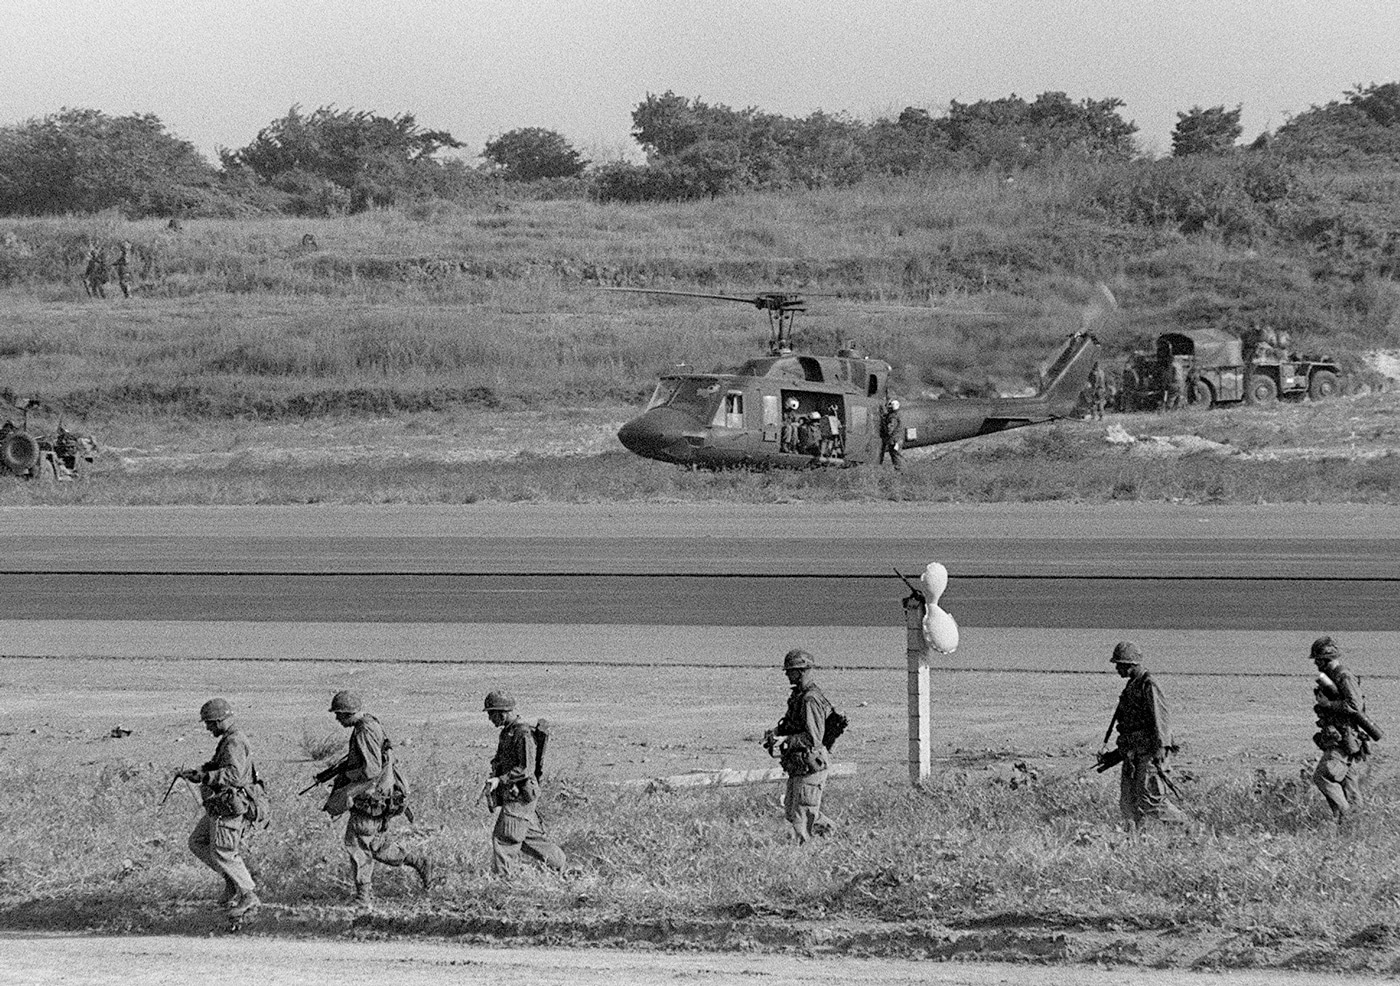 In this photo, we see Marines engaged in Operation Urgent Fury advance along a road on Grenada. A UH-1 Iroquois helicopter prepares to take off to support their mission. 